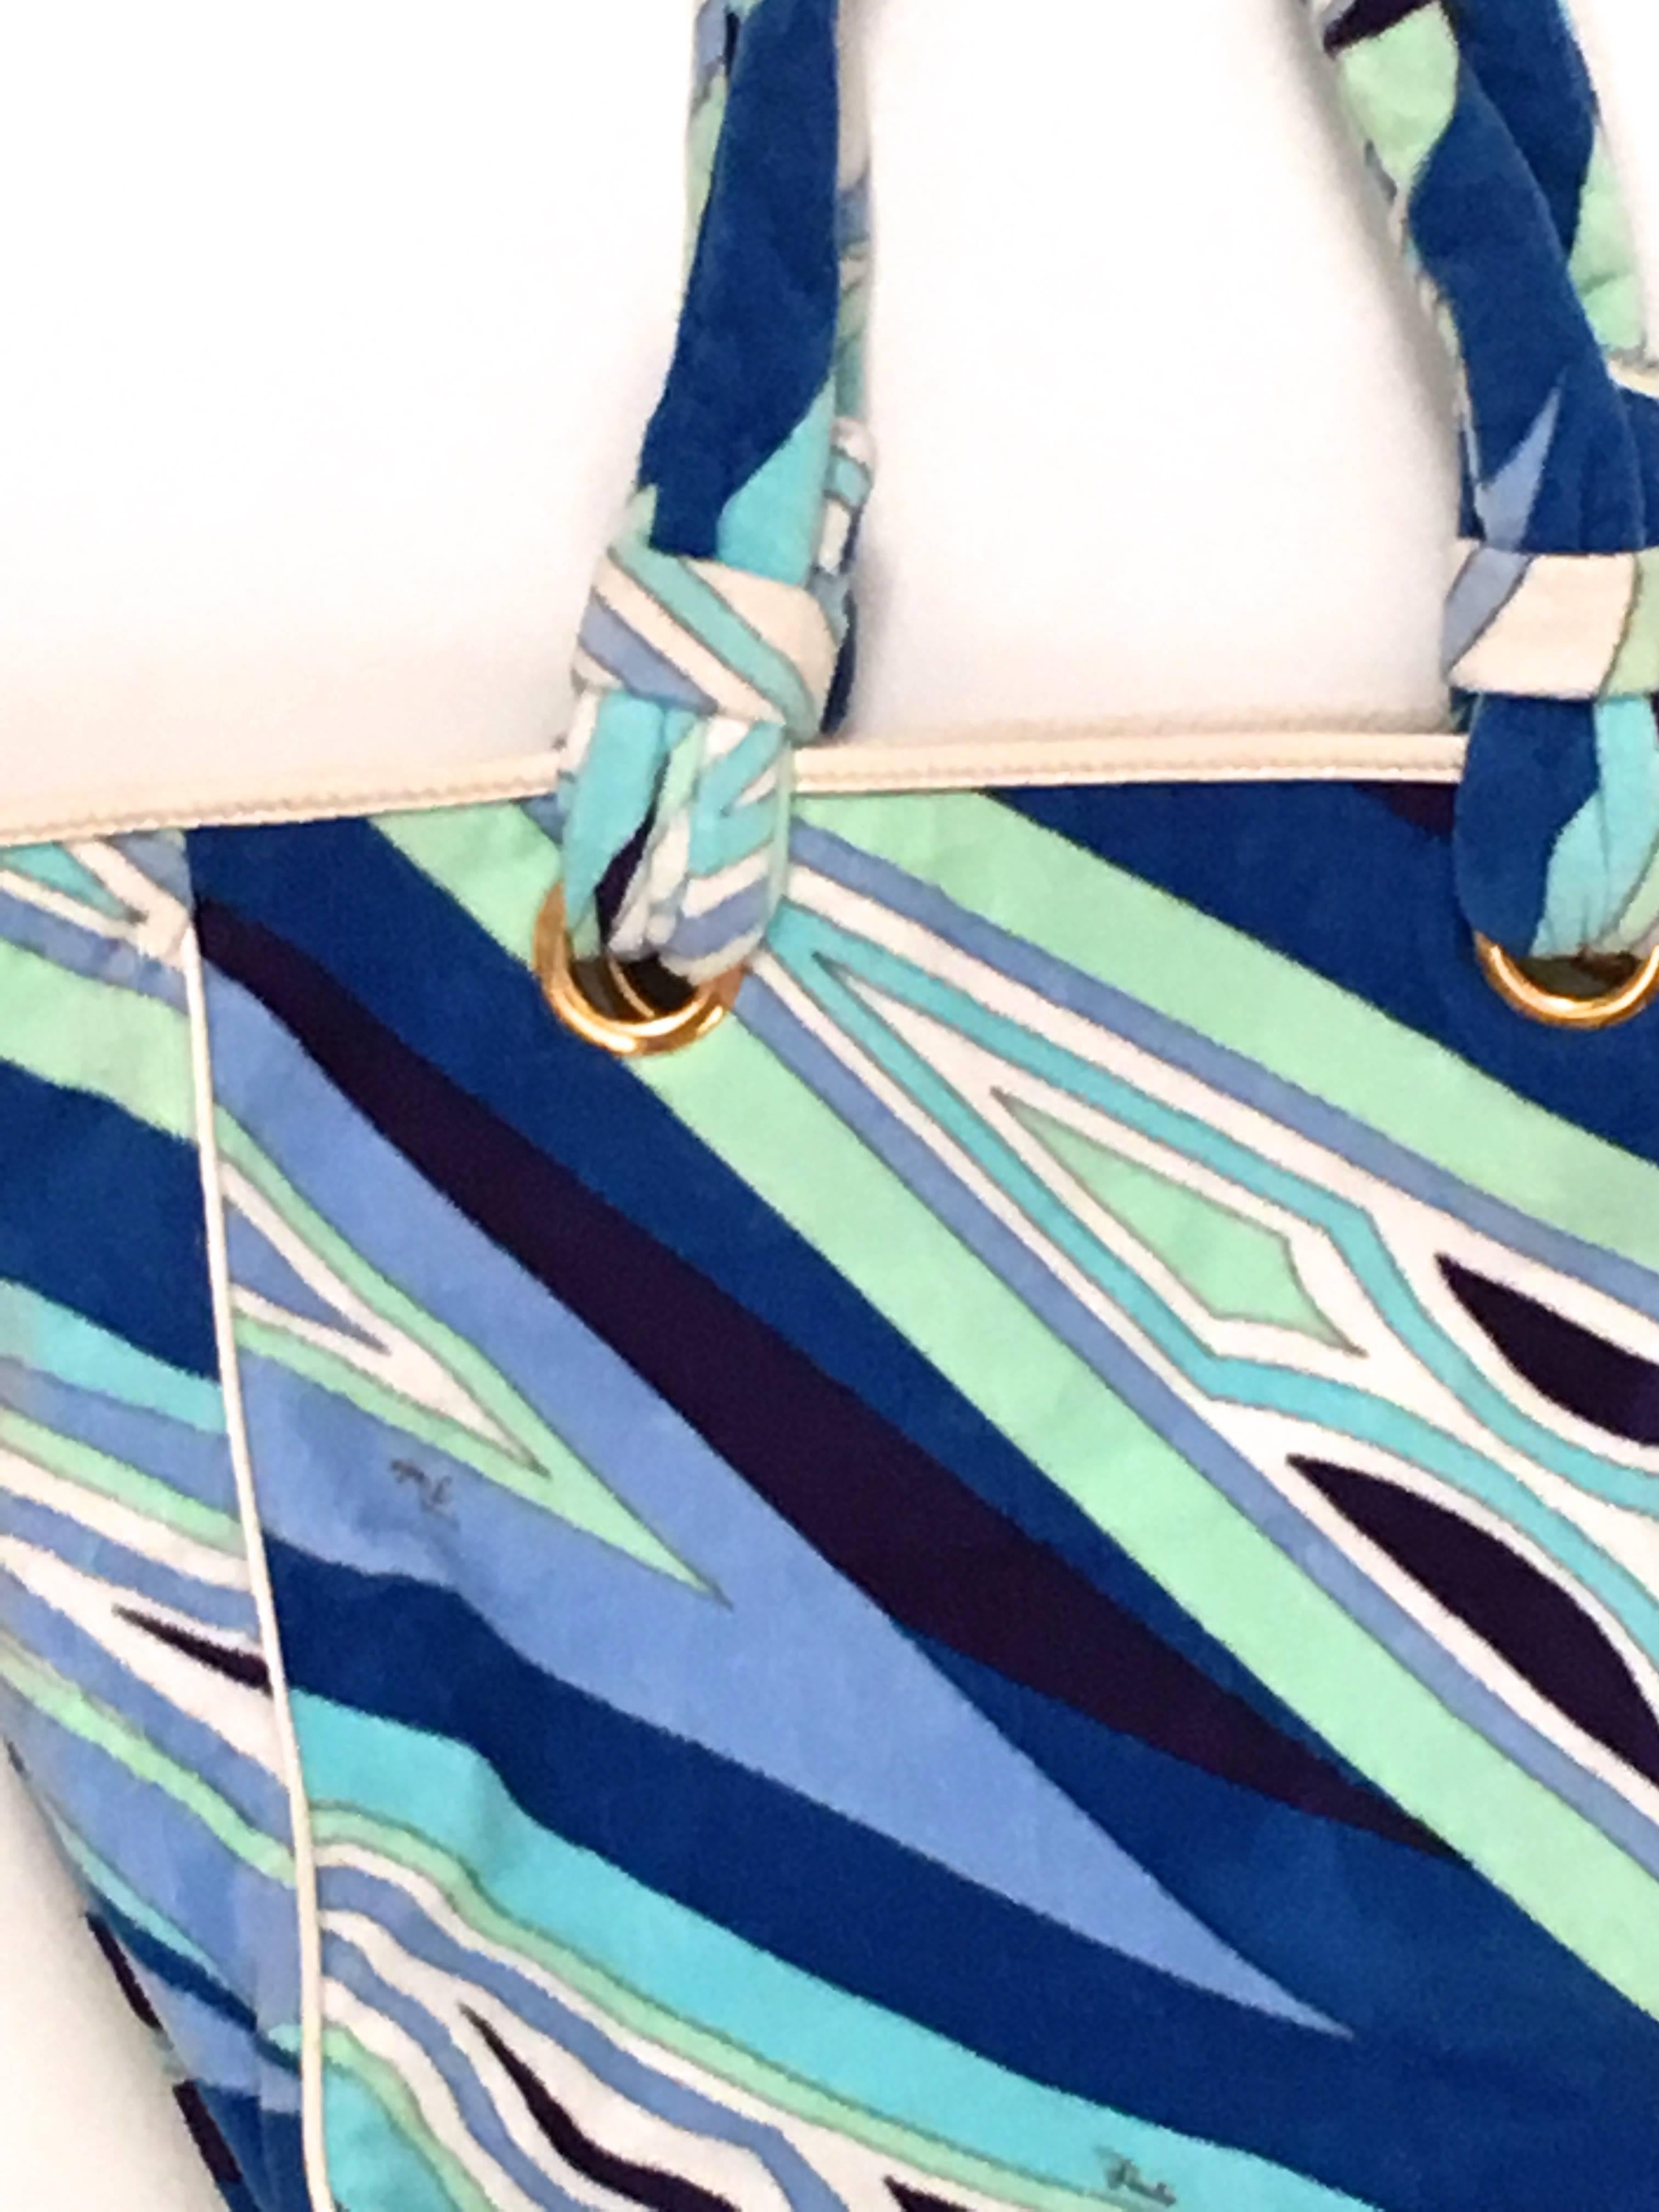 Presented here is a fantastic Emilio Pucci beach bag. The bag is made entirely of soft cotton terry cloth in a gorgeous array of geometrically patterned shapes of varying shades of light blues, dark blues, indigo, and shades of white. The bag is